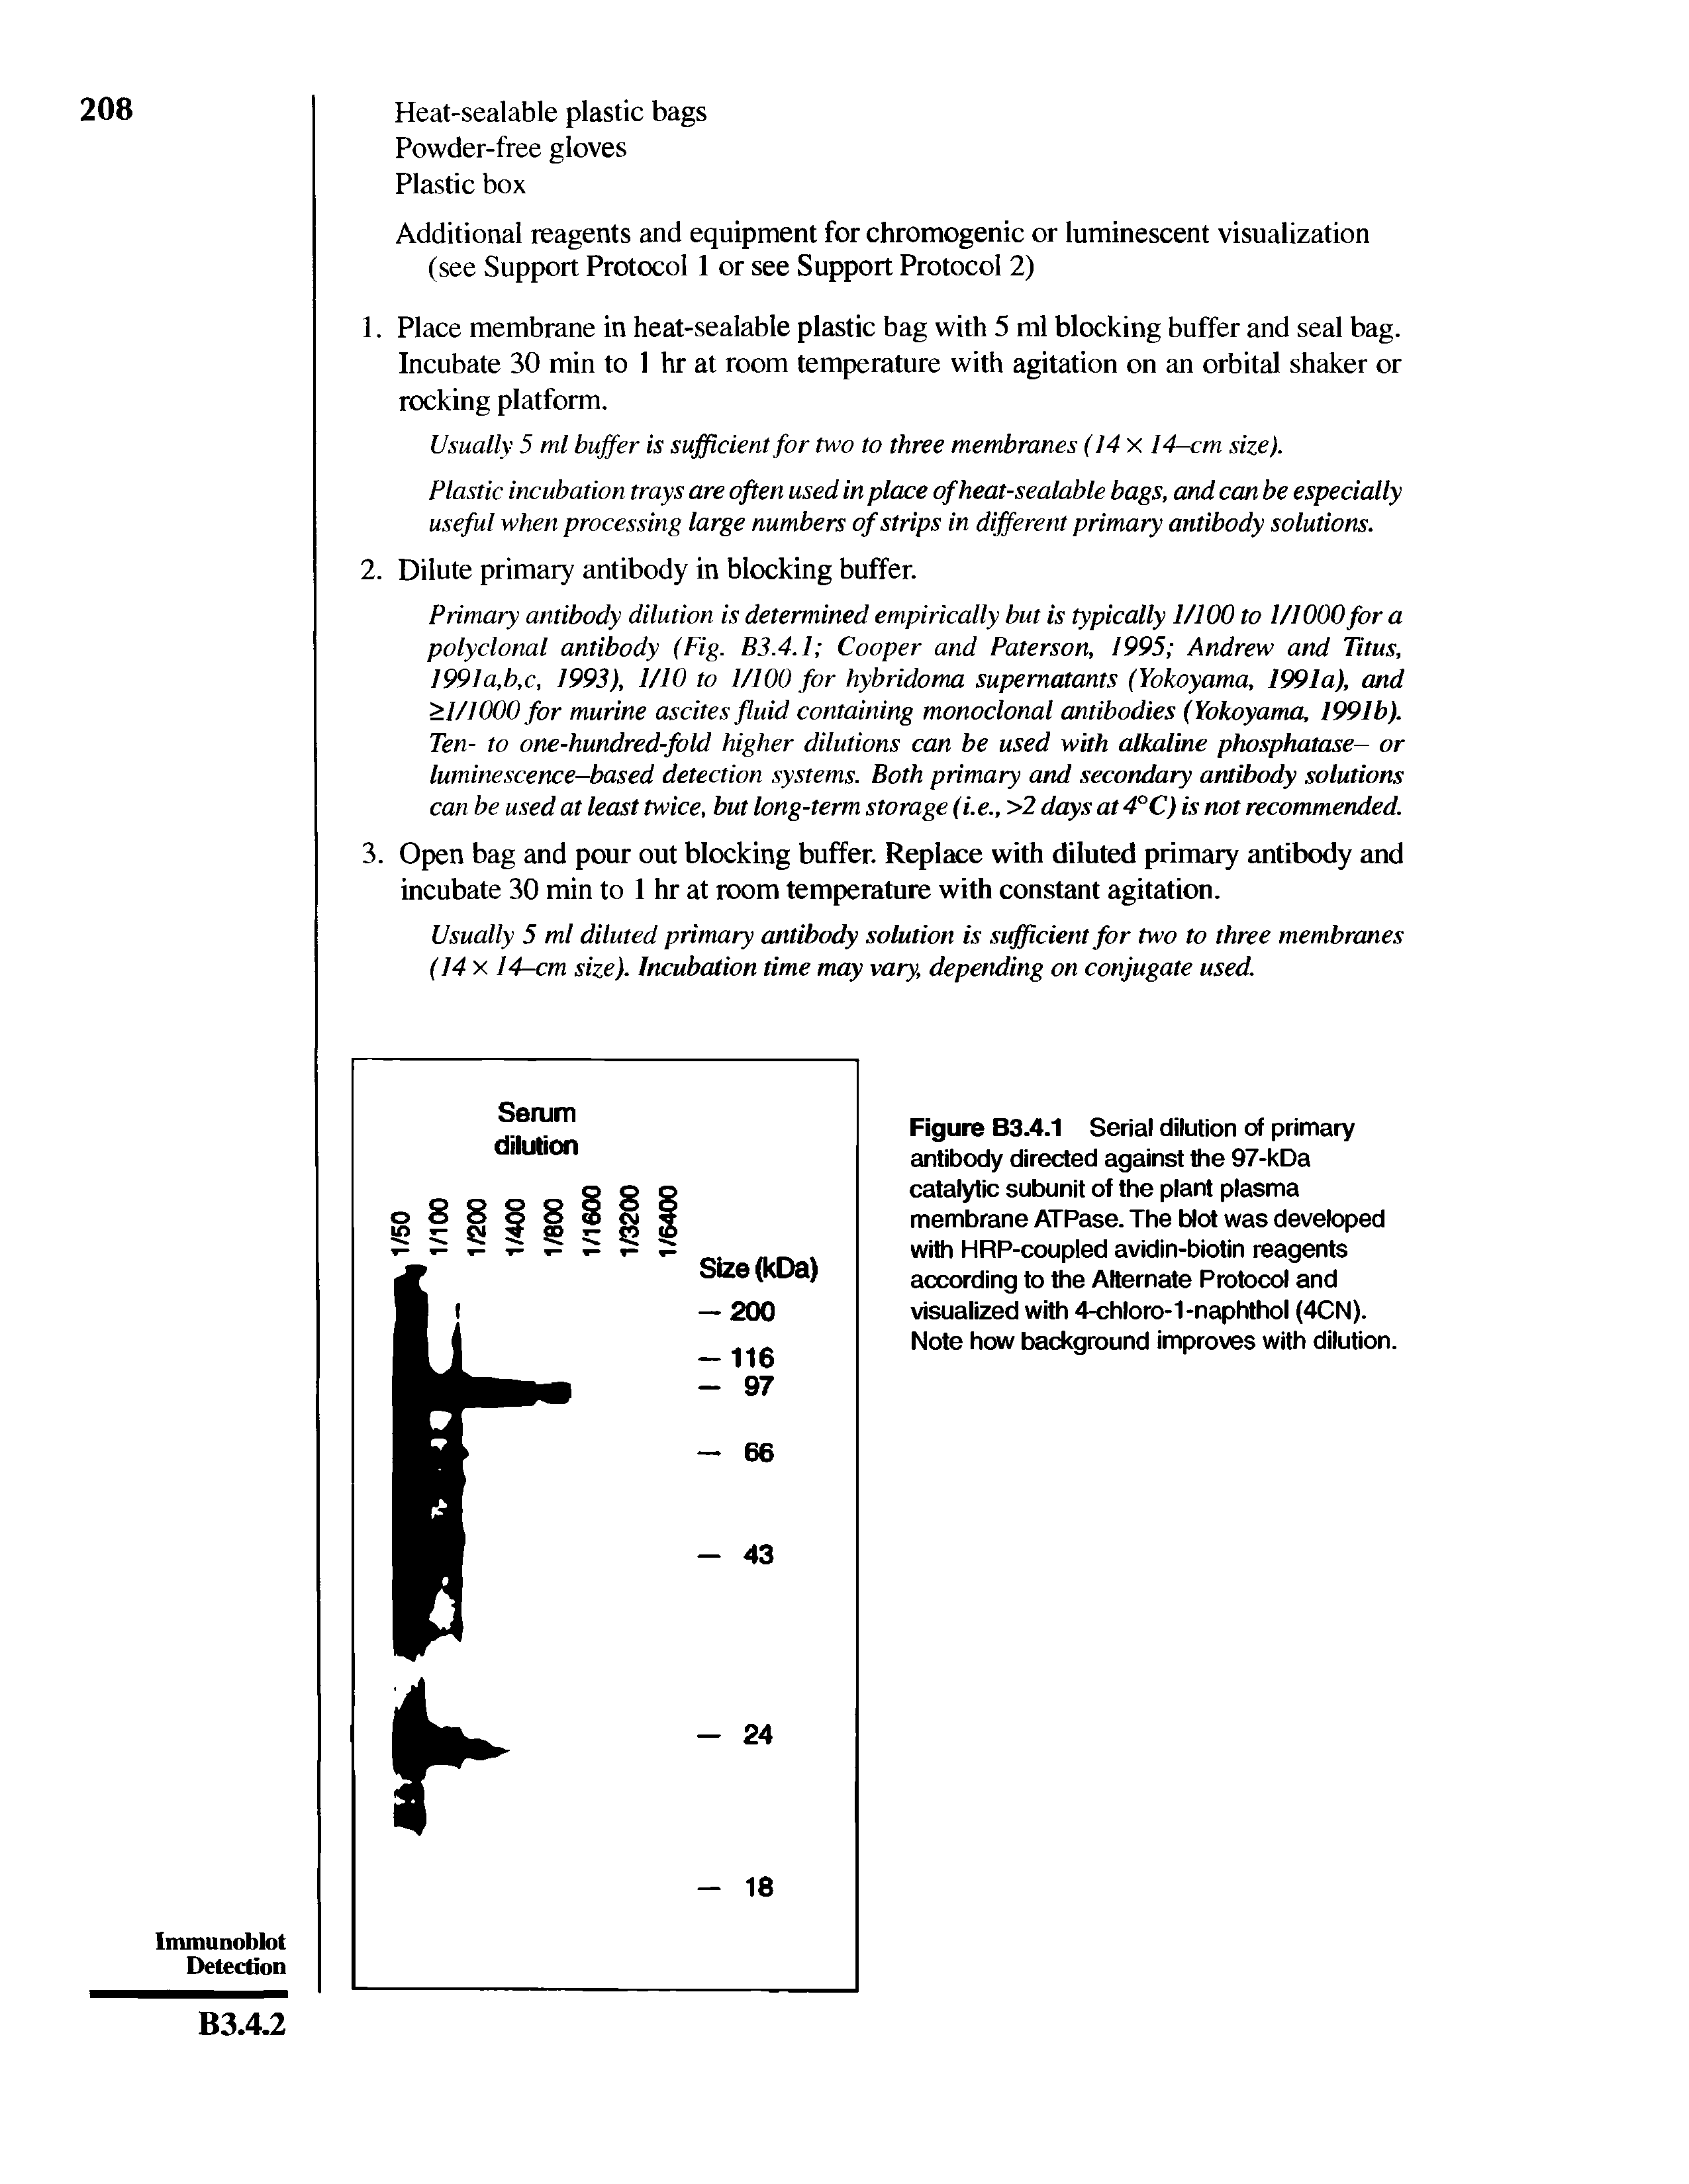 Figure B3.4.1 Serial dilution of primary antibody directed against the 97-kDa catalytic subunit of the plant plasma membrane ATPase. The blot was developed with HRP-coupled avidin-biotin reagents according to the Alternate Protocol and visualized with 4-chloro-1-naphthol (4CN). Note how background improves with dilution...